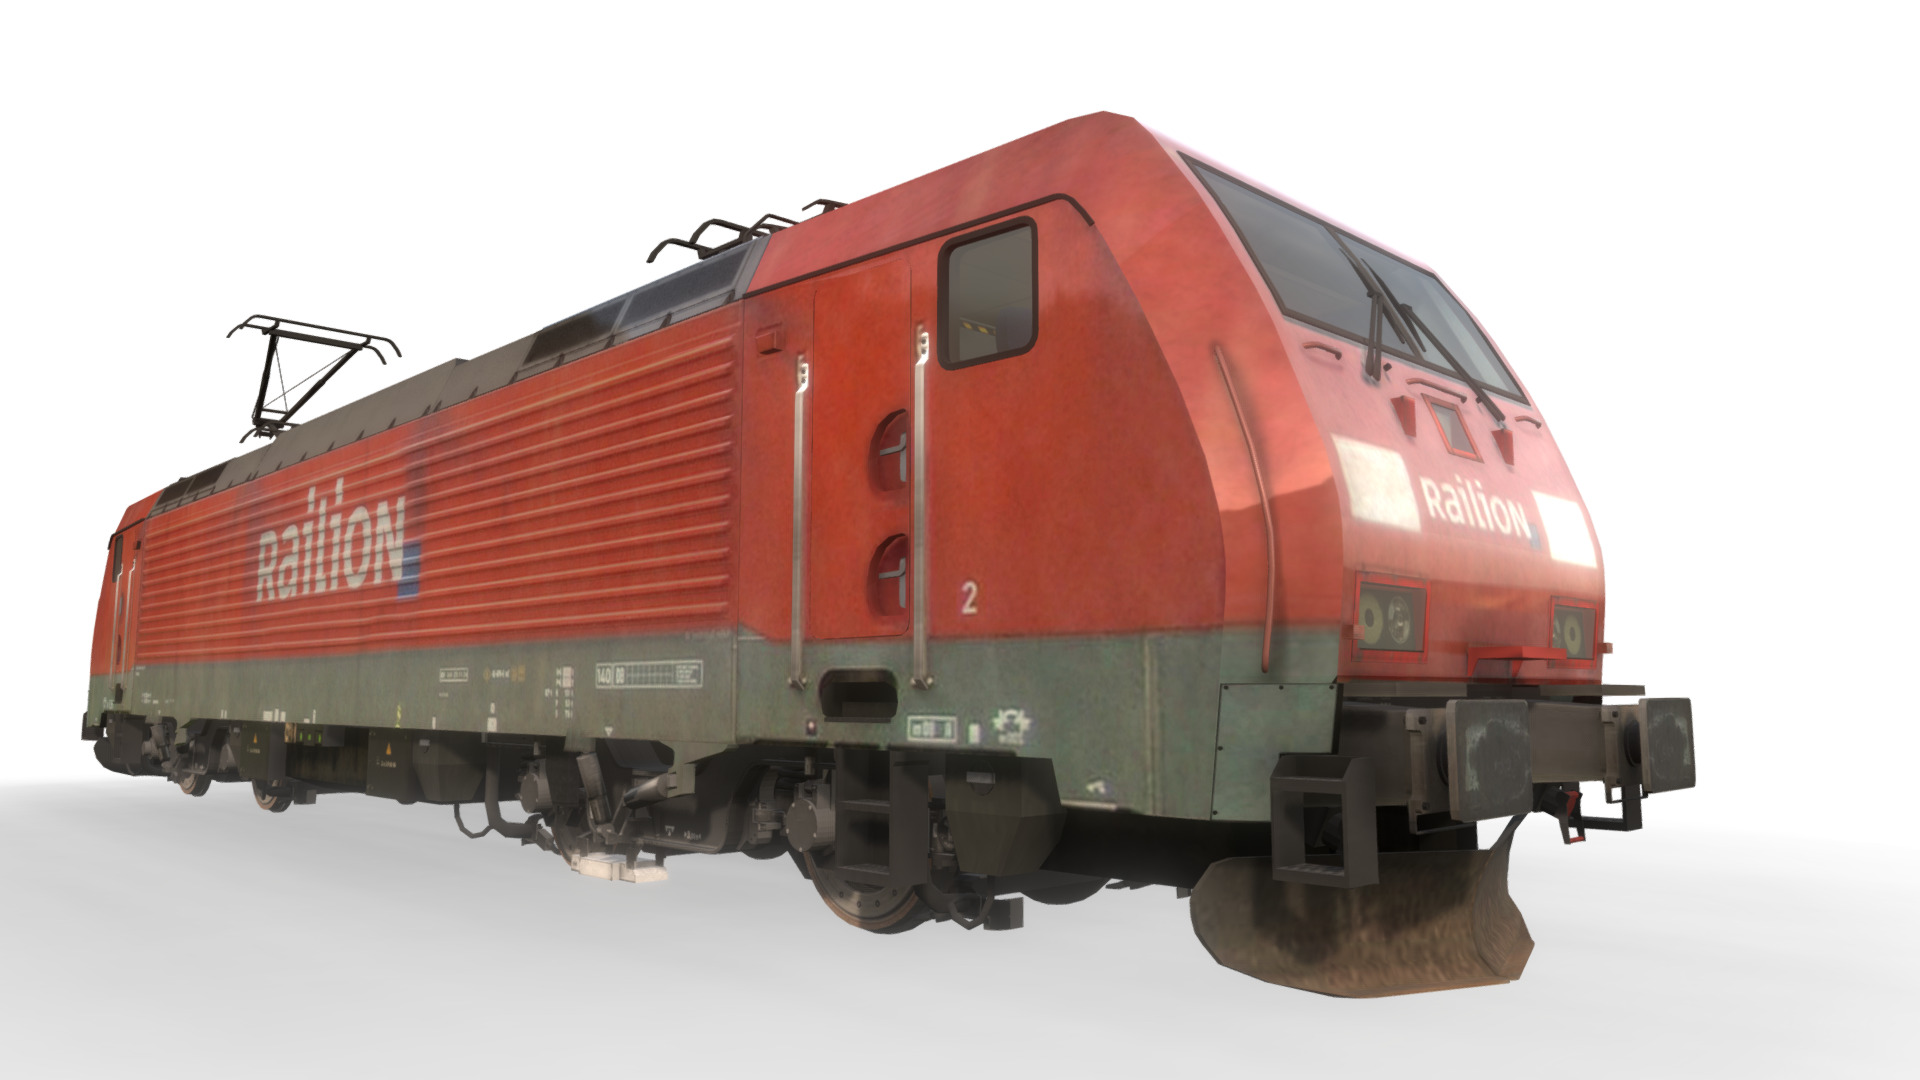 3D model Locomotive Class ES64F4 – 189 – Railion - This is a 3D model of the Locomotive Class ES64F4 - 189 - Railion. The 3D model is about a red train on a white background.